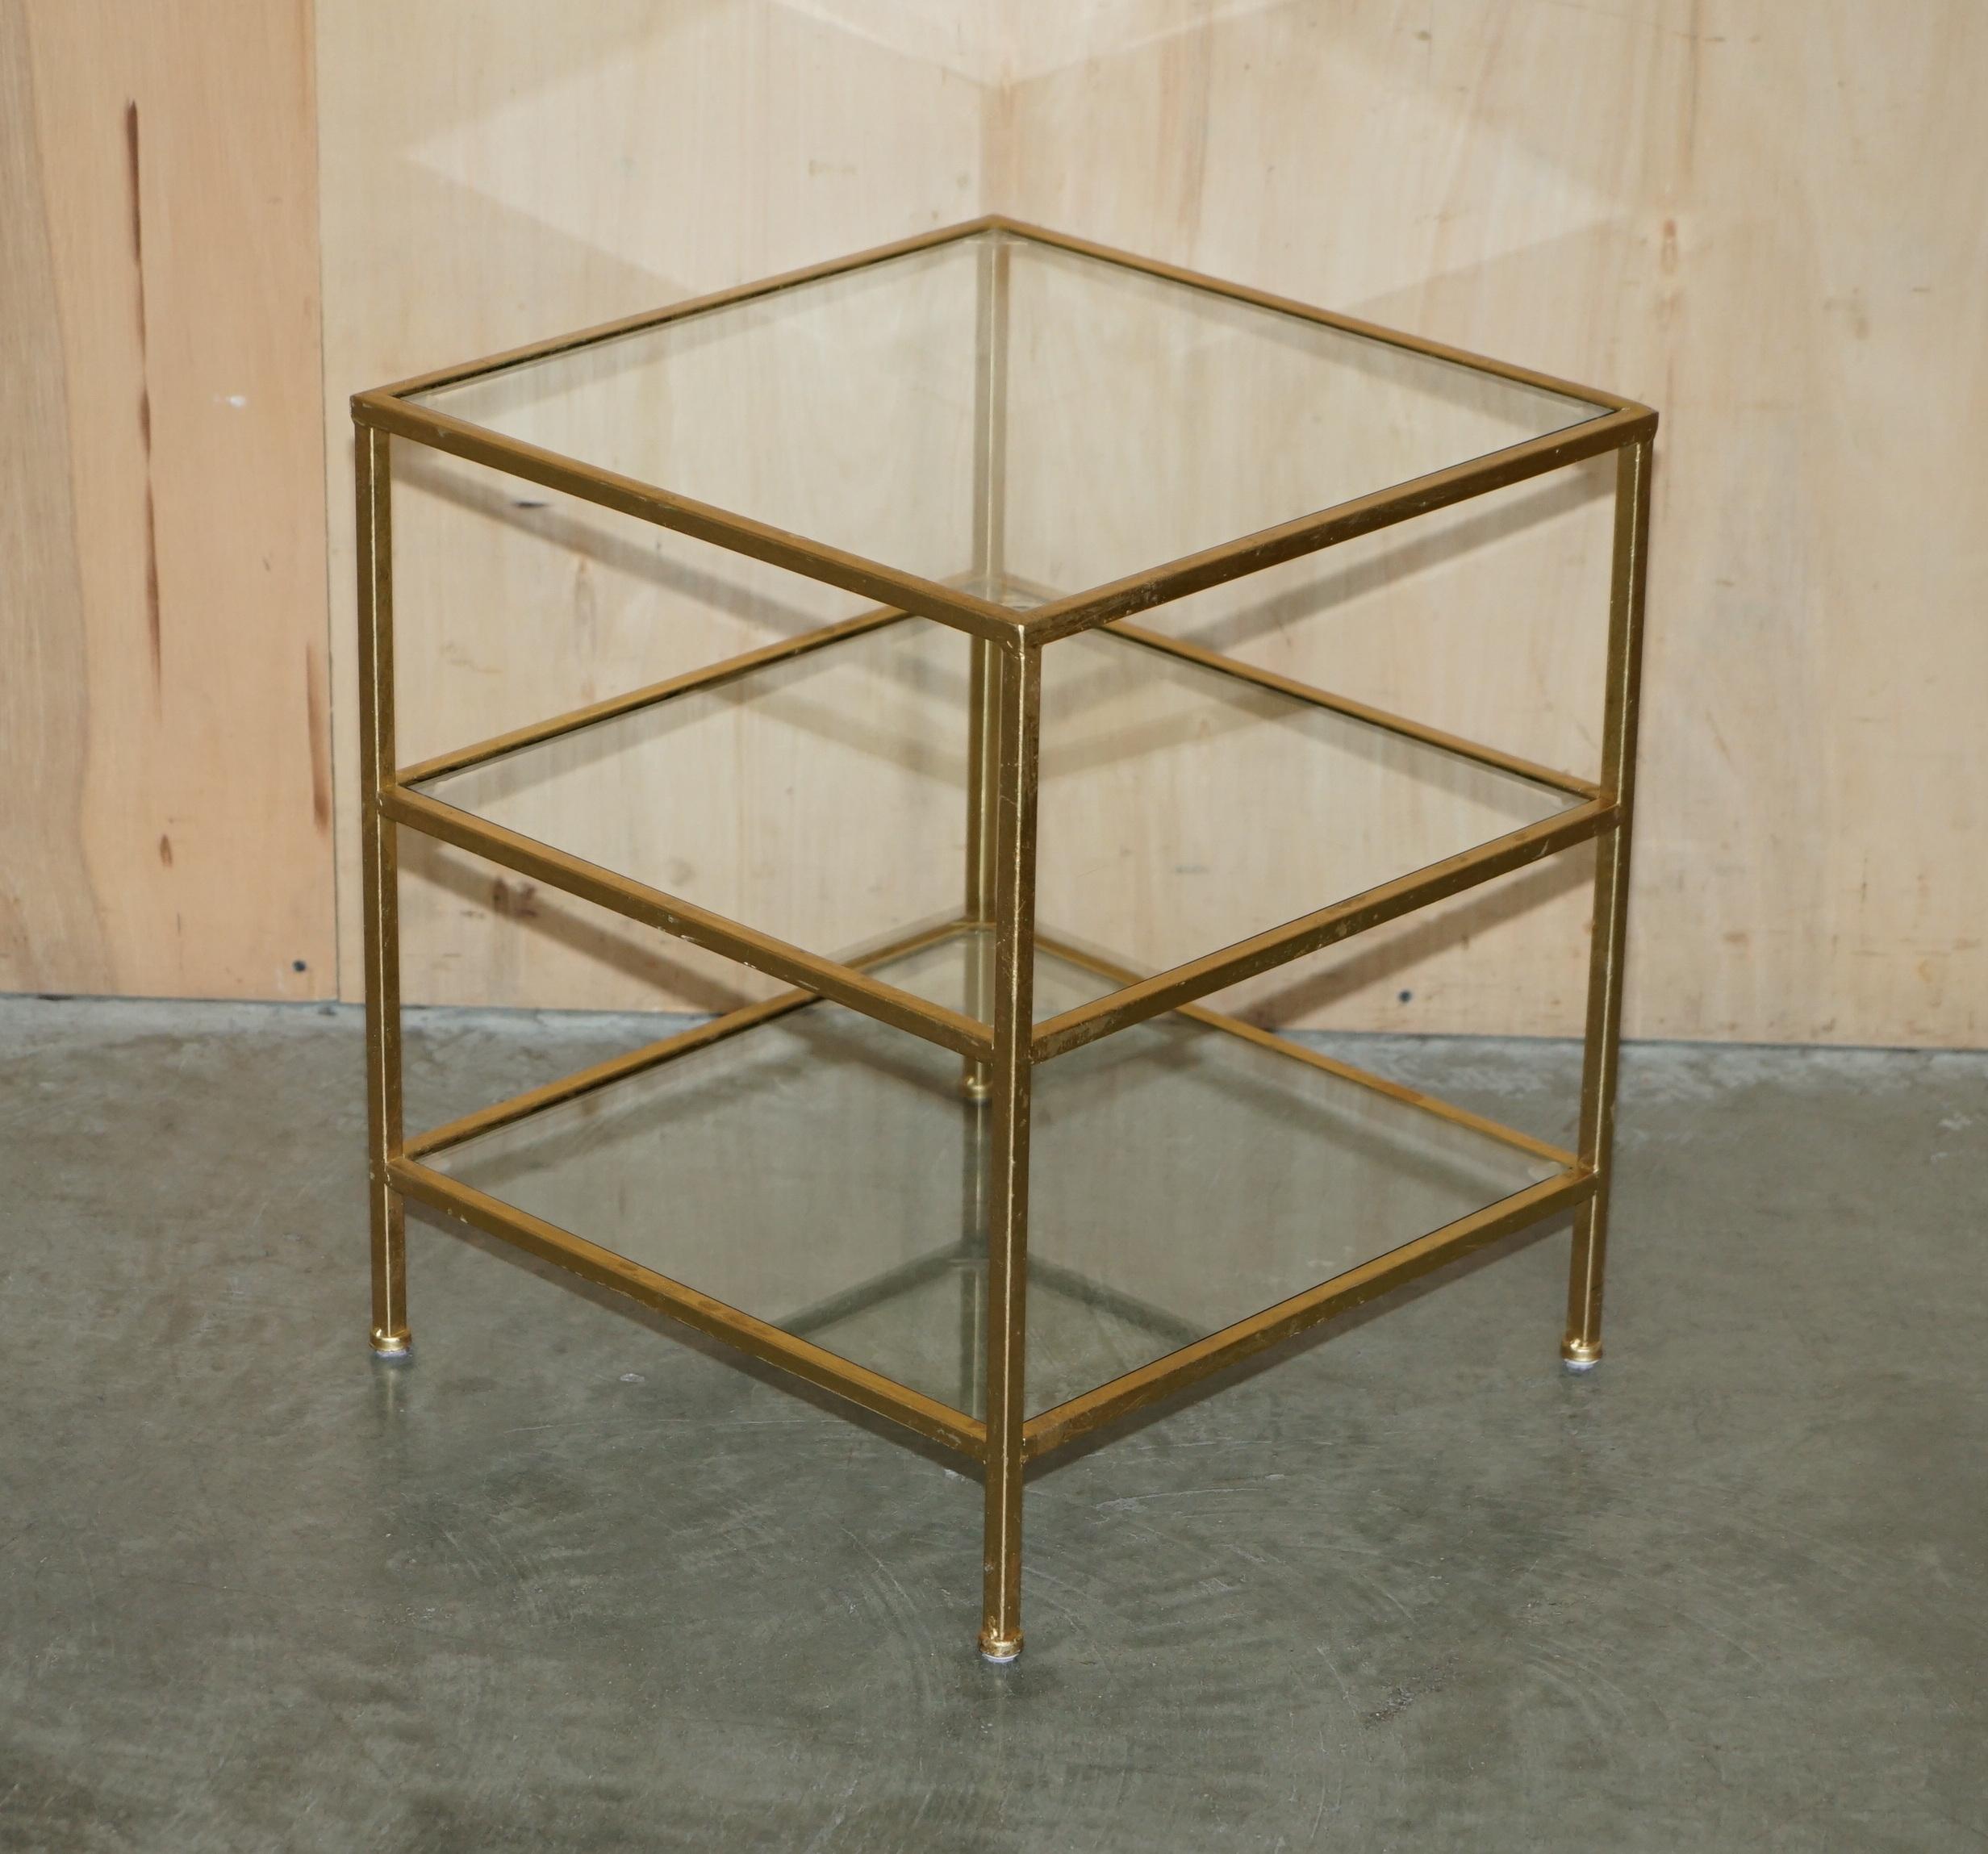 Royal House Antiques

Royal House Antiques is delighted to offer for sale this lovely original pair of circa 1970’s Mid Century Modern / Maison Jansen Paris style Etagere side end tables

Please note the delivery fee listed is just a guide, it